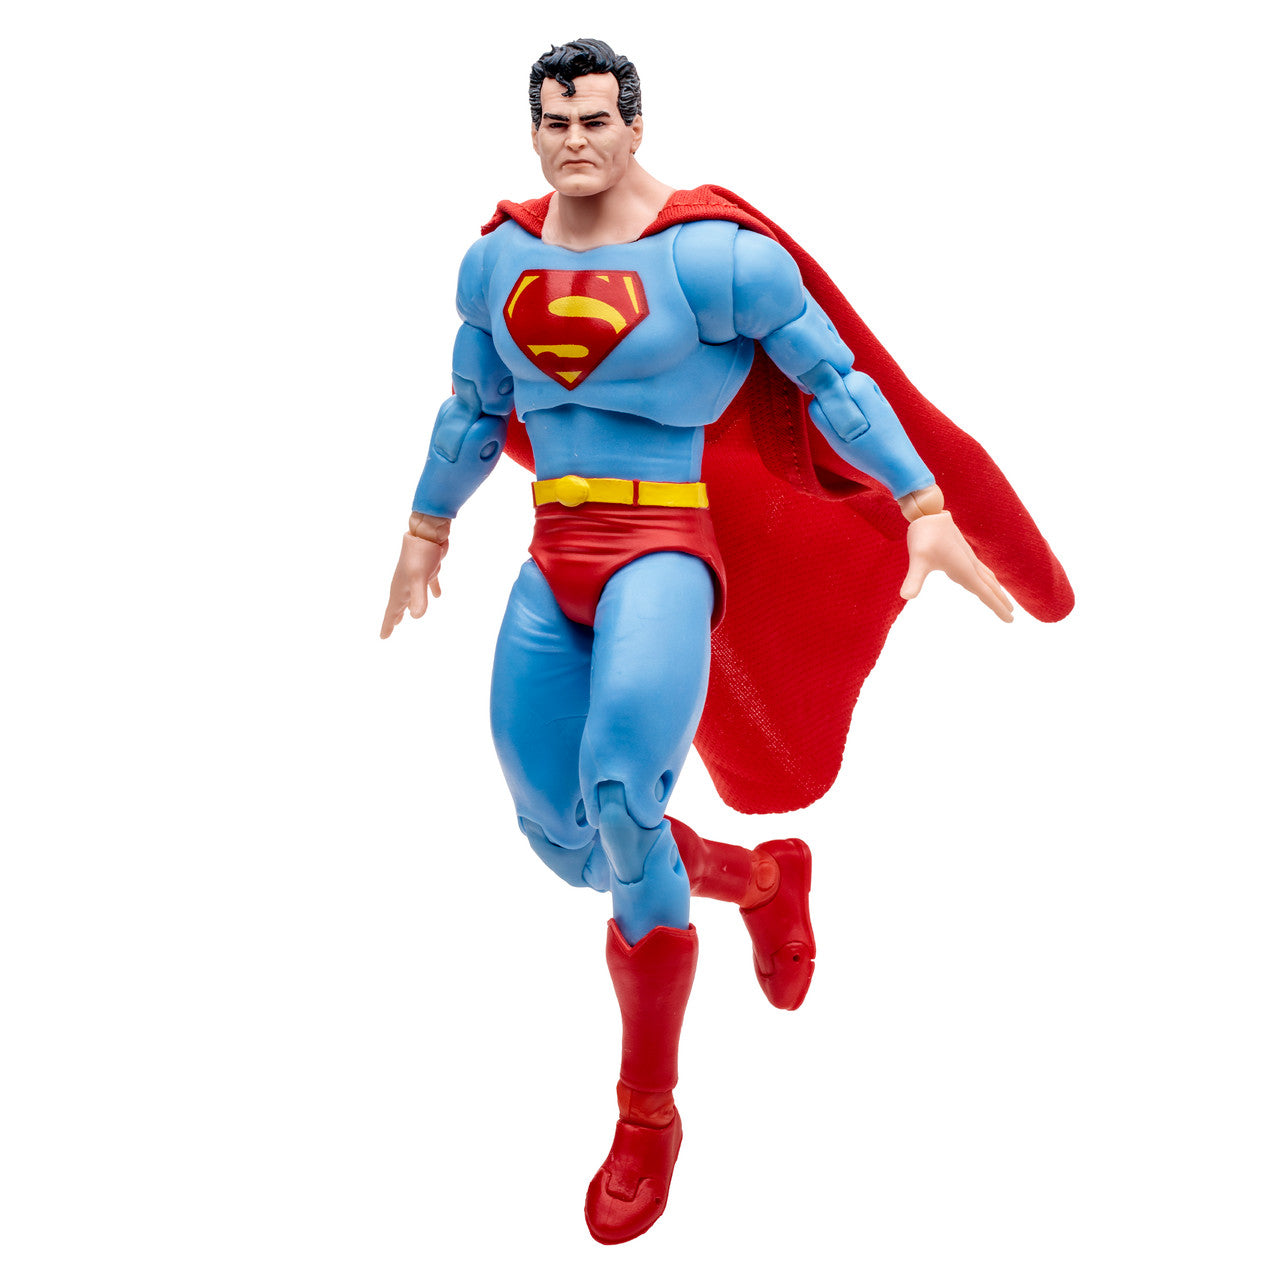 Superman of Earth-2 (Crisis on Infinite Earths) Gold Label 7" Build-A-Figure By Mcfarlane